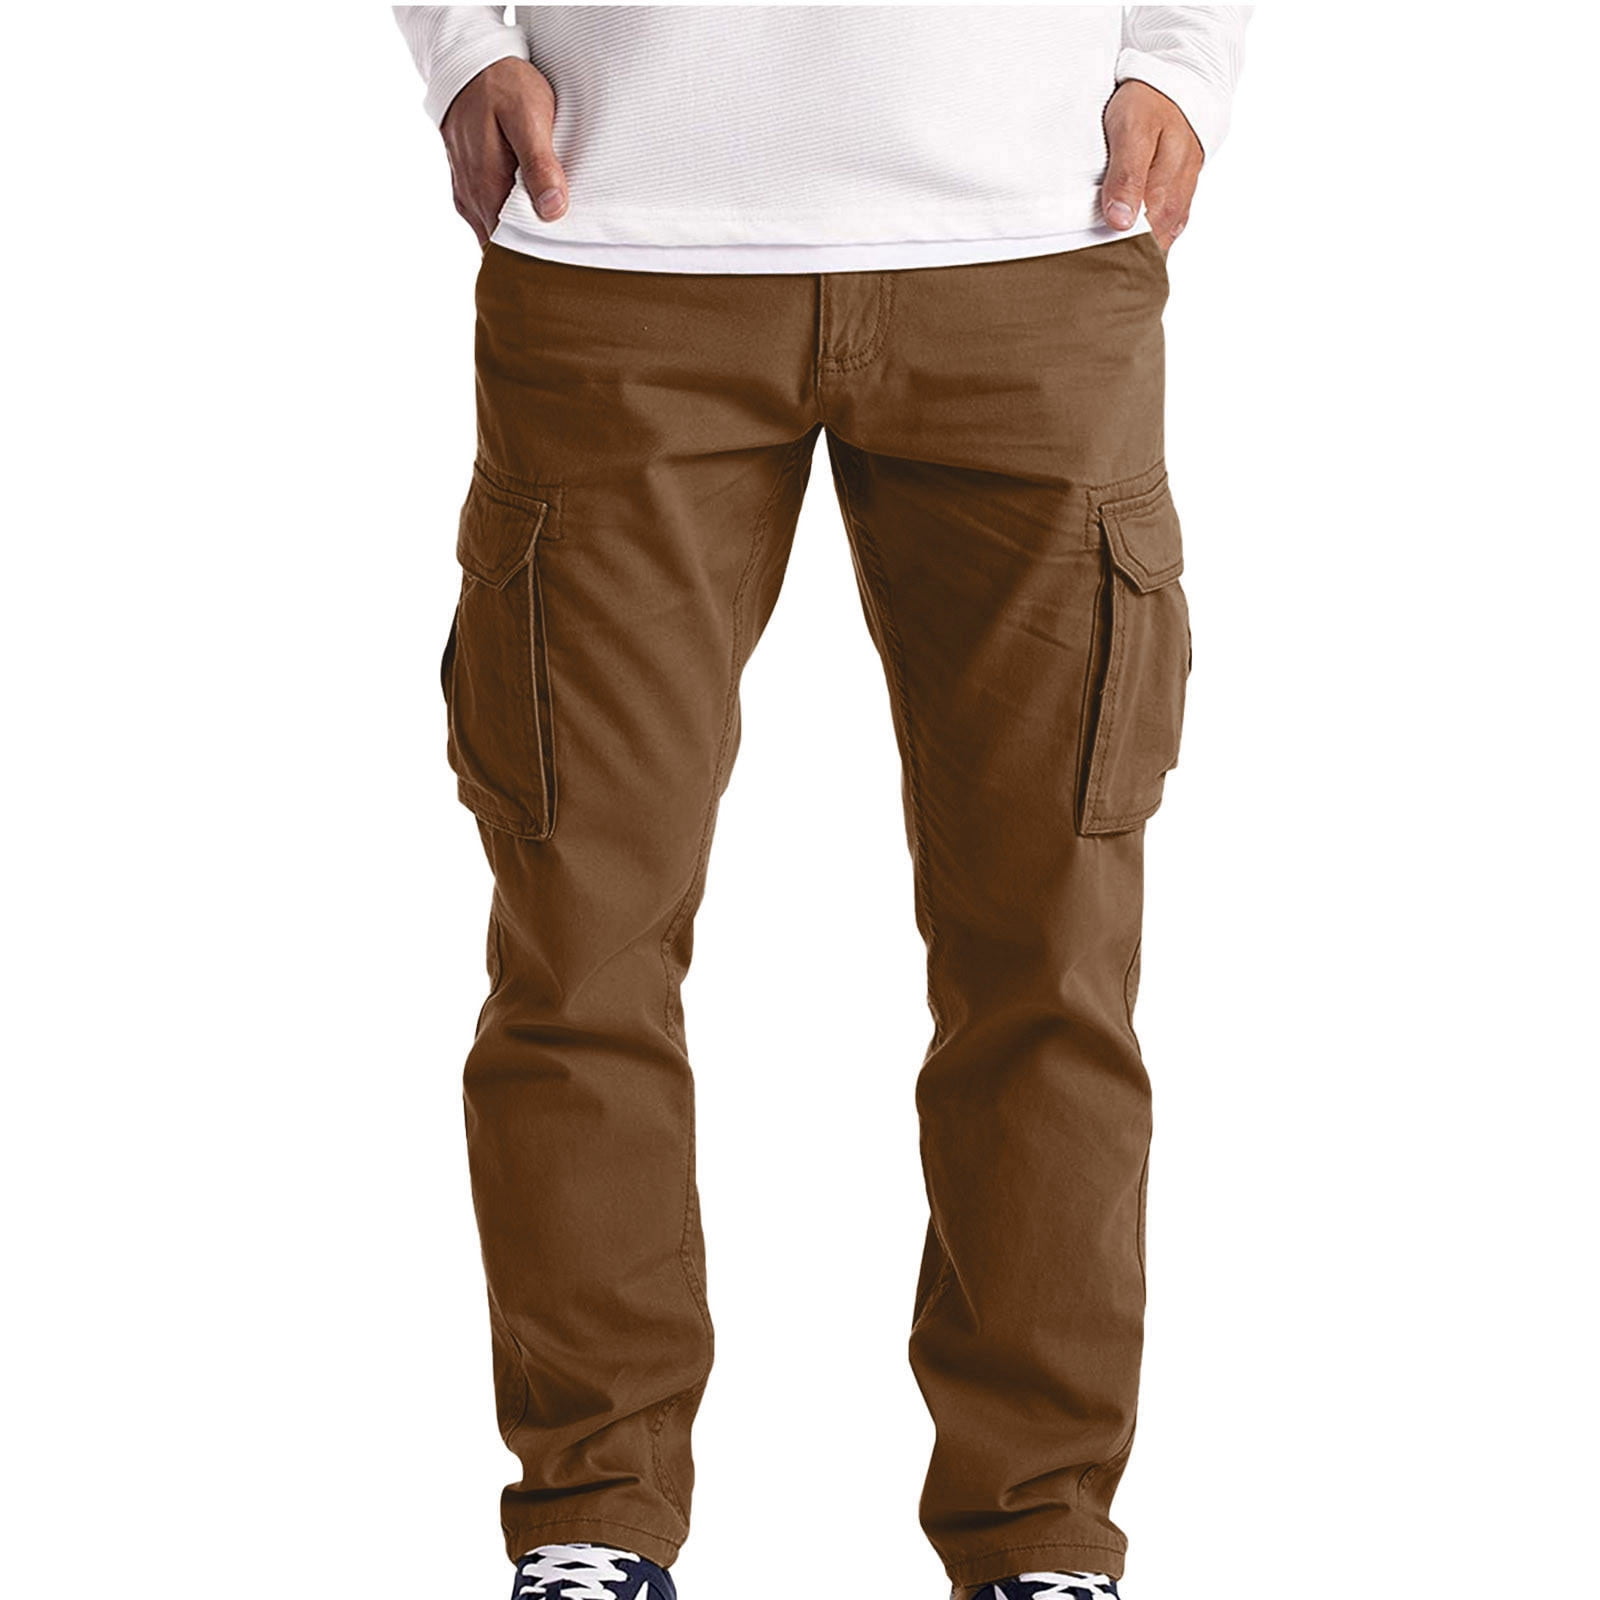 Buy Off Duty India Neutral Nude Men Baggy Fit Cargo - Nude online